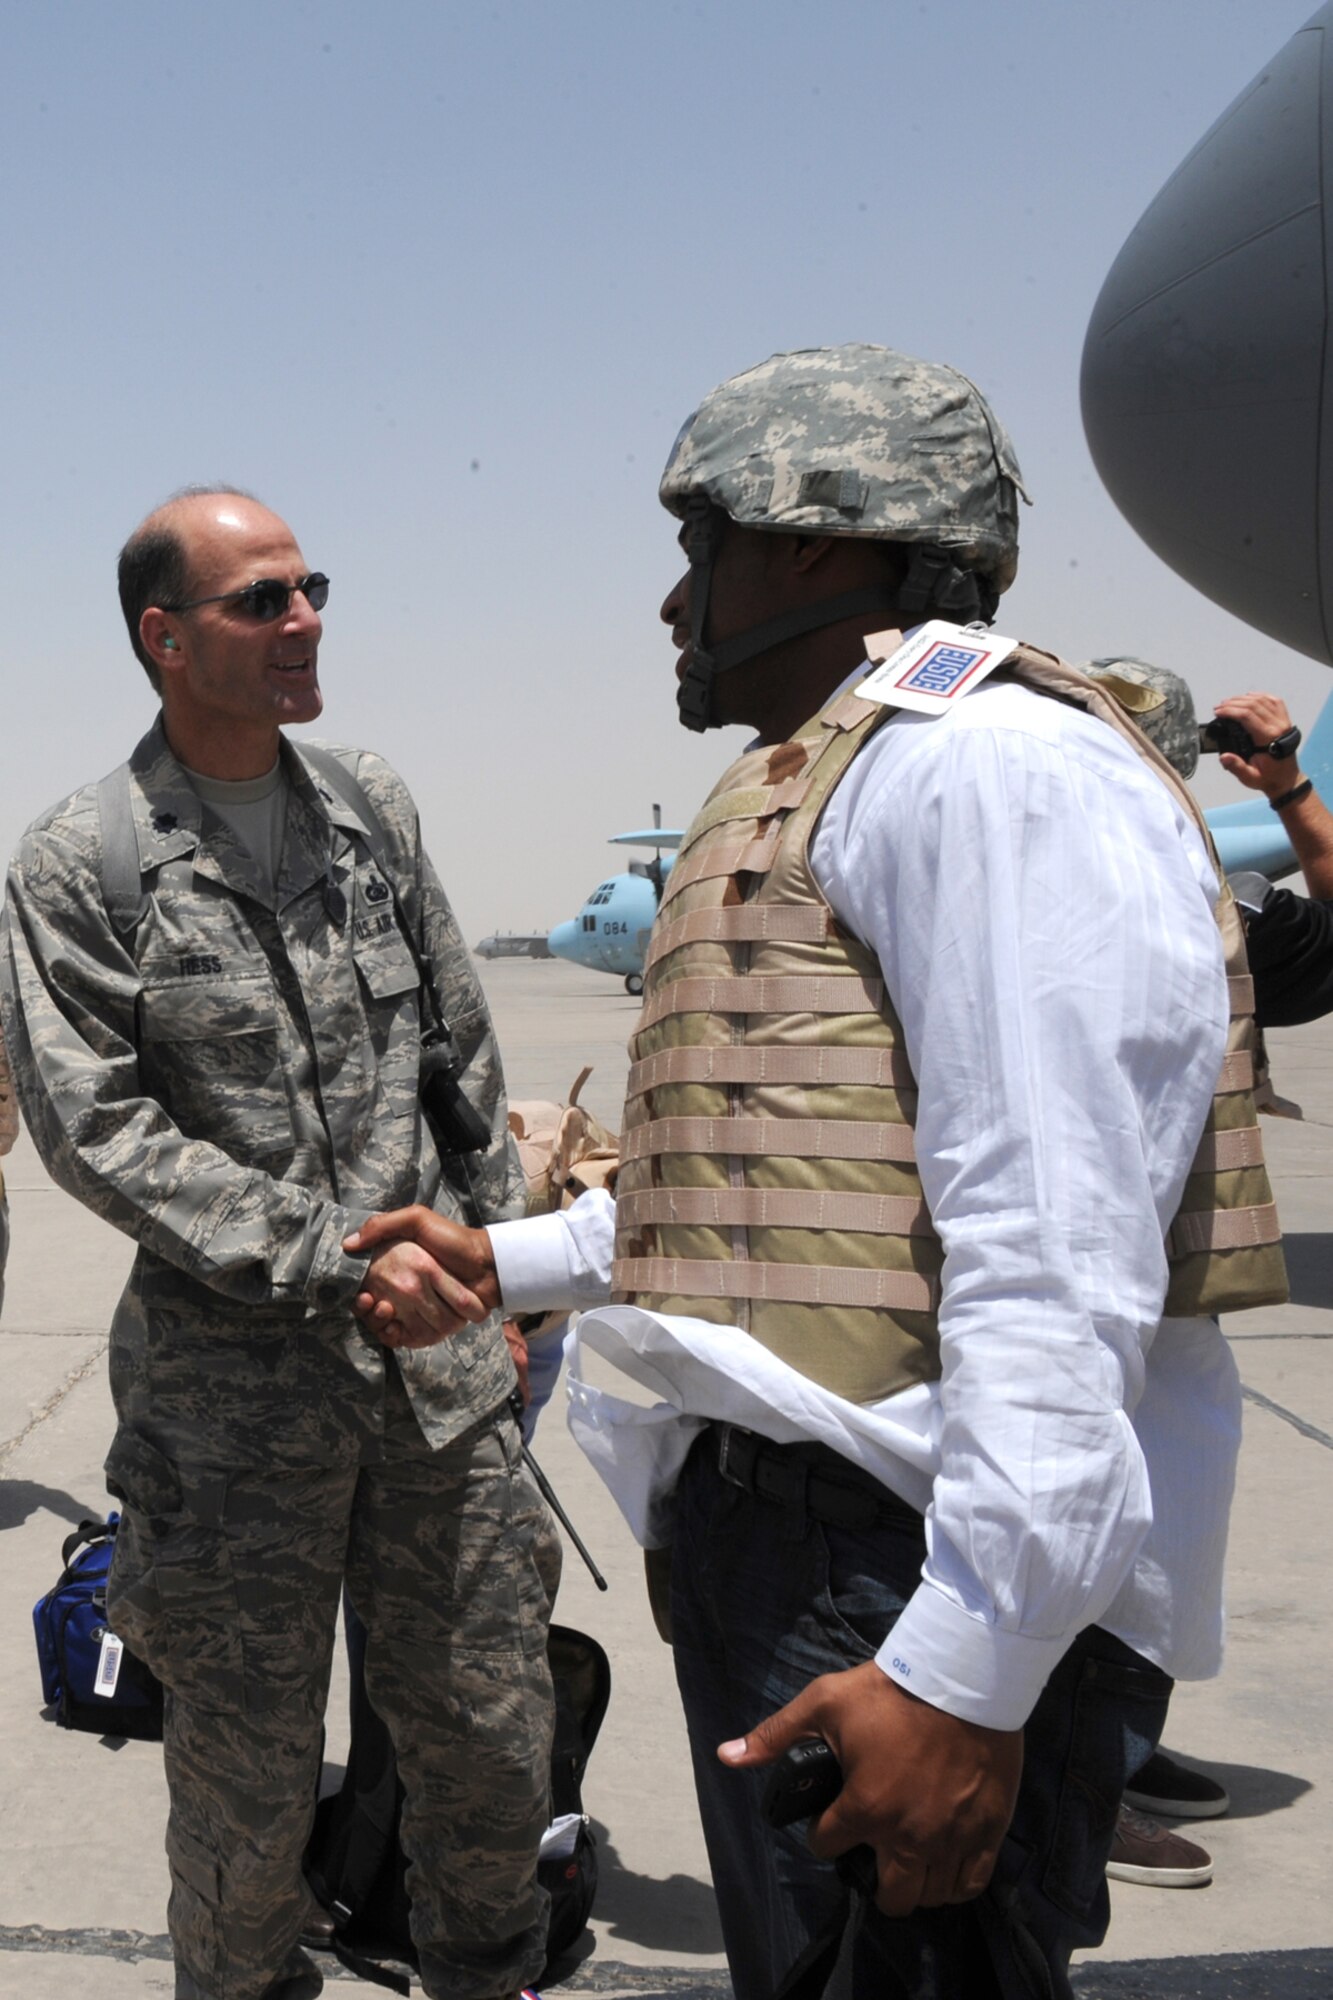 SATHER AIR BASE, Iraq -- Lt. Col. Craig Hess (left), 447th Air Expeditionary Group deputy commander, greets Osi Umenyiora of the New York Giants after he arrives to Sather Air Base on an Air Force C-17 July 7. Mr. Umenyiora is part of the USO's Summer Troop Visit. (U.S. Air Force photo/Tech. Sgt. Amanda Callahan)
 